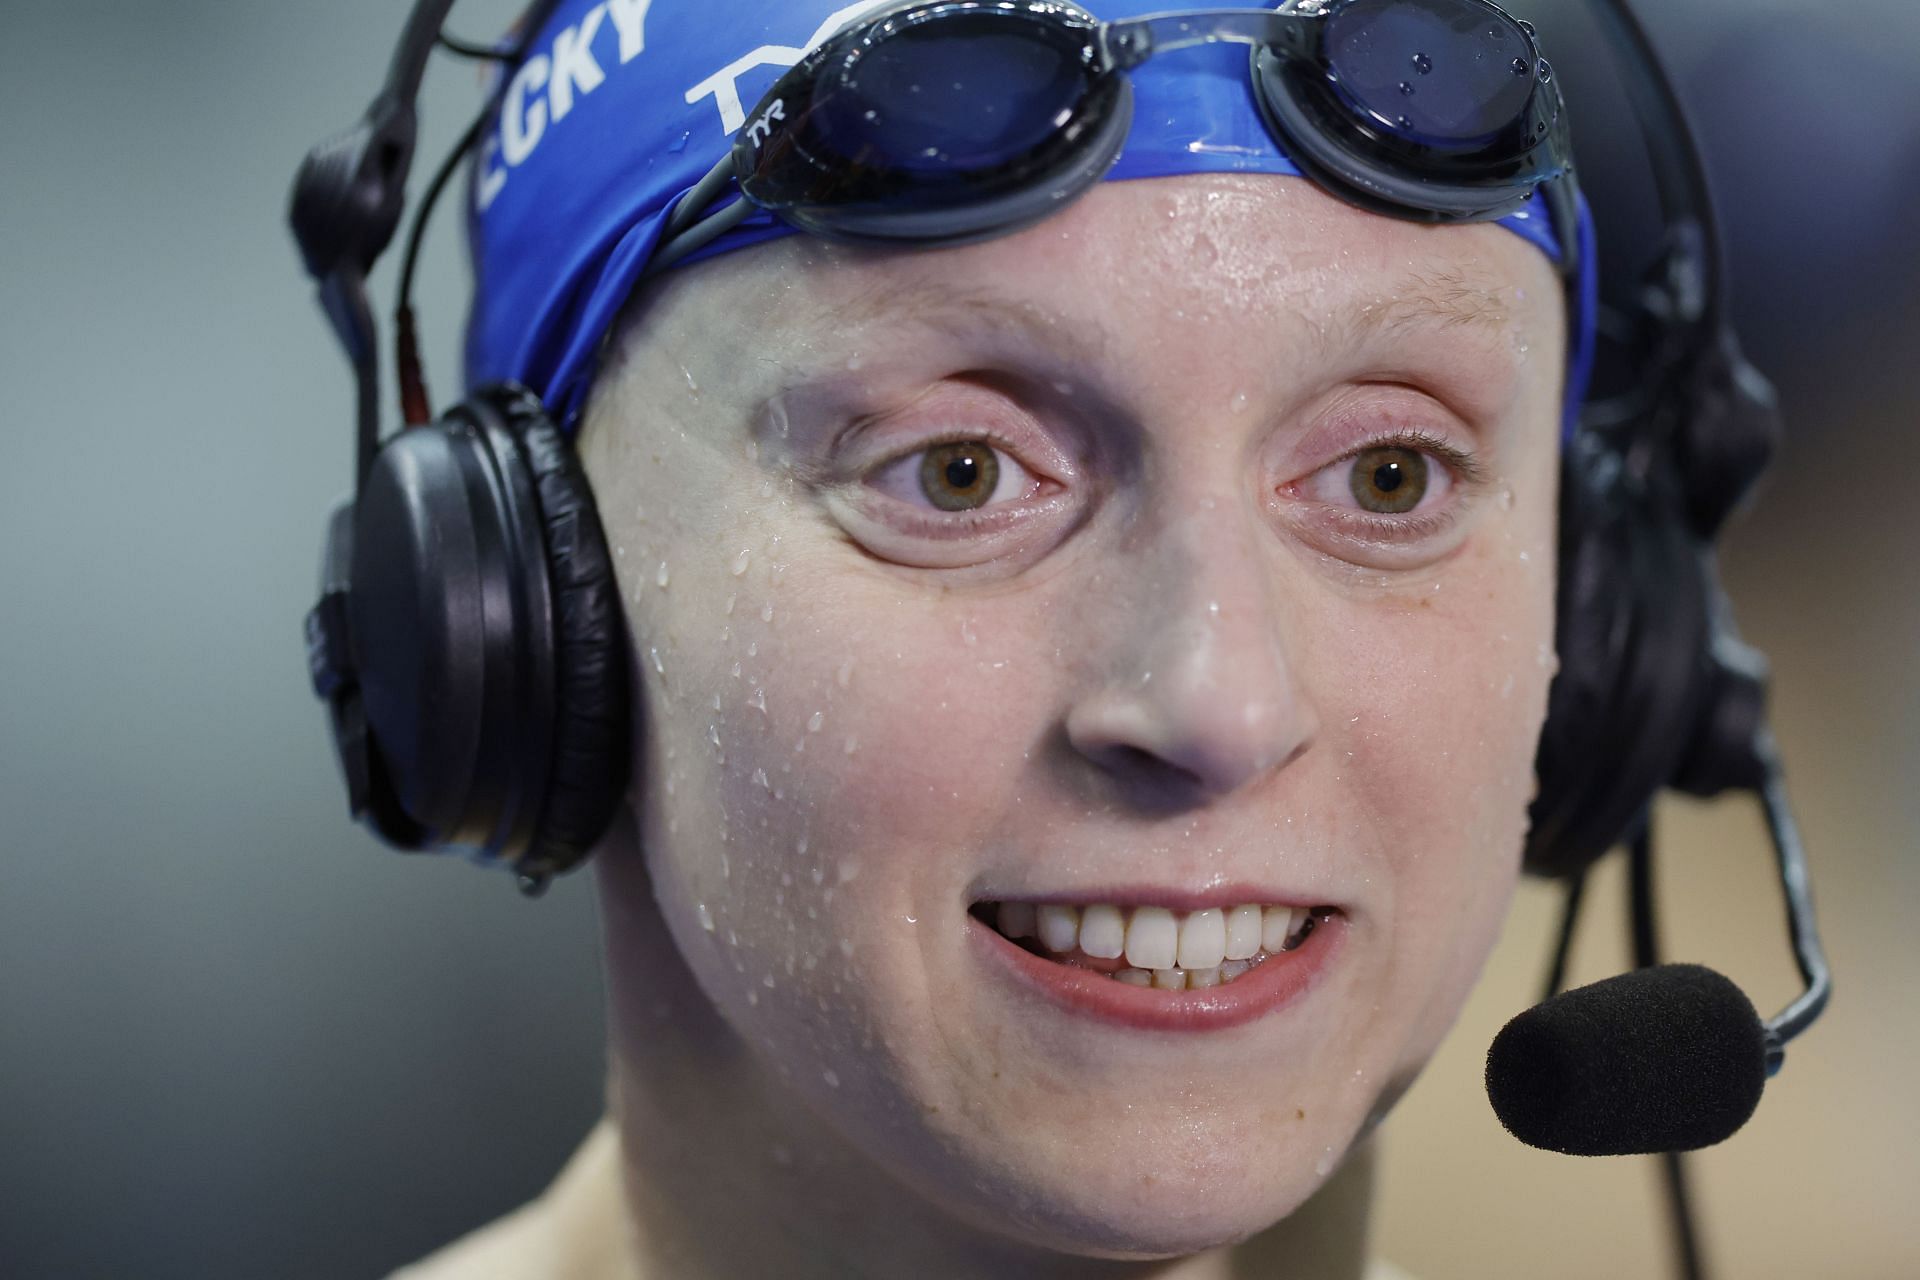 Ledecky at TYR Pro Swim Series Knoxville - Day 2